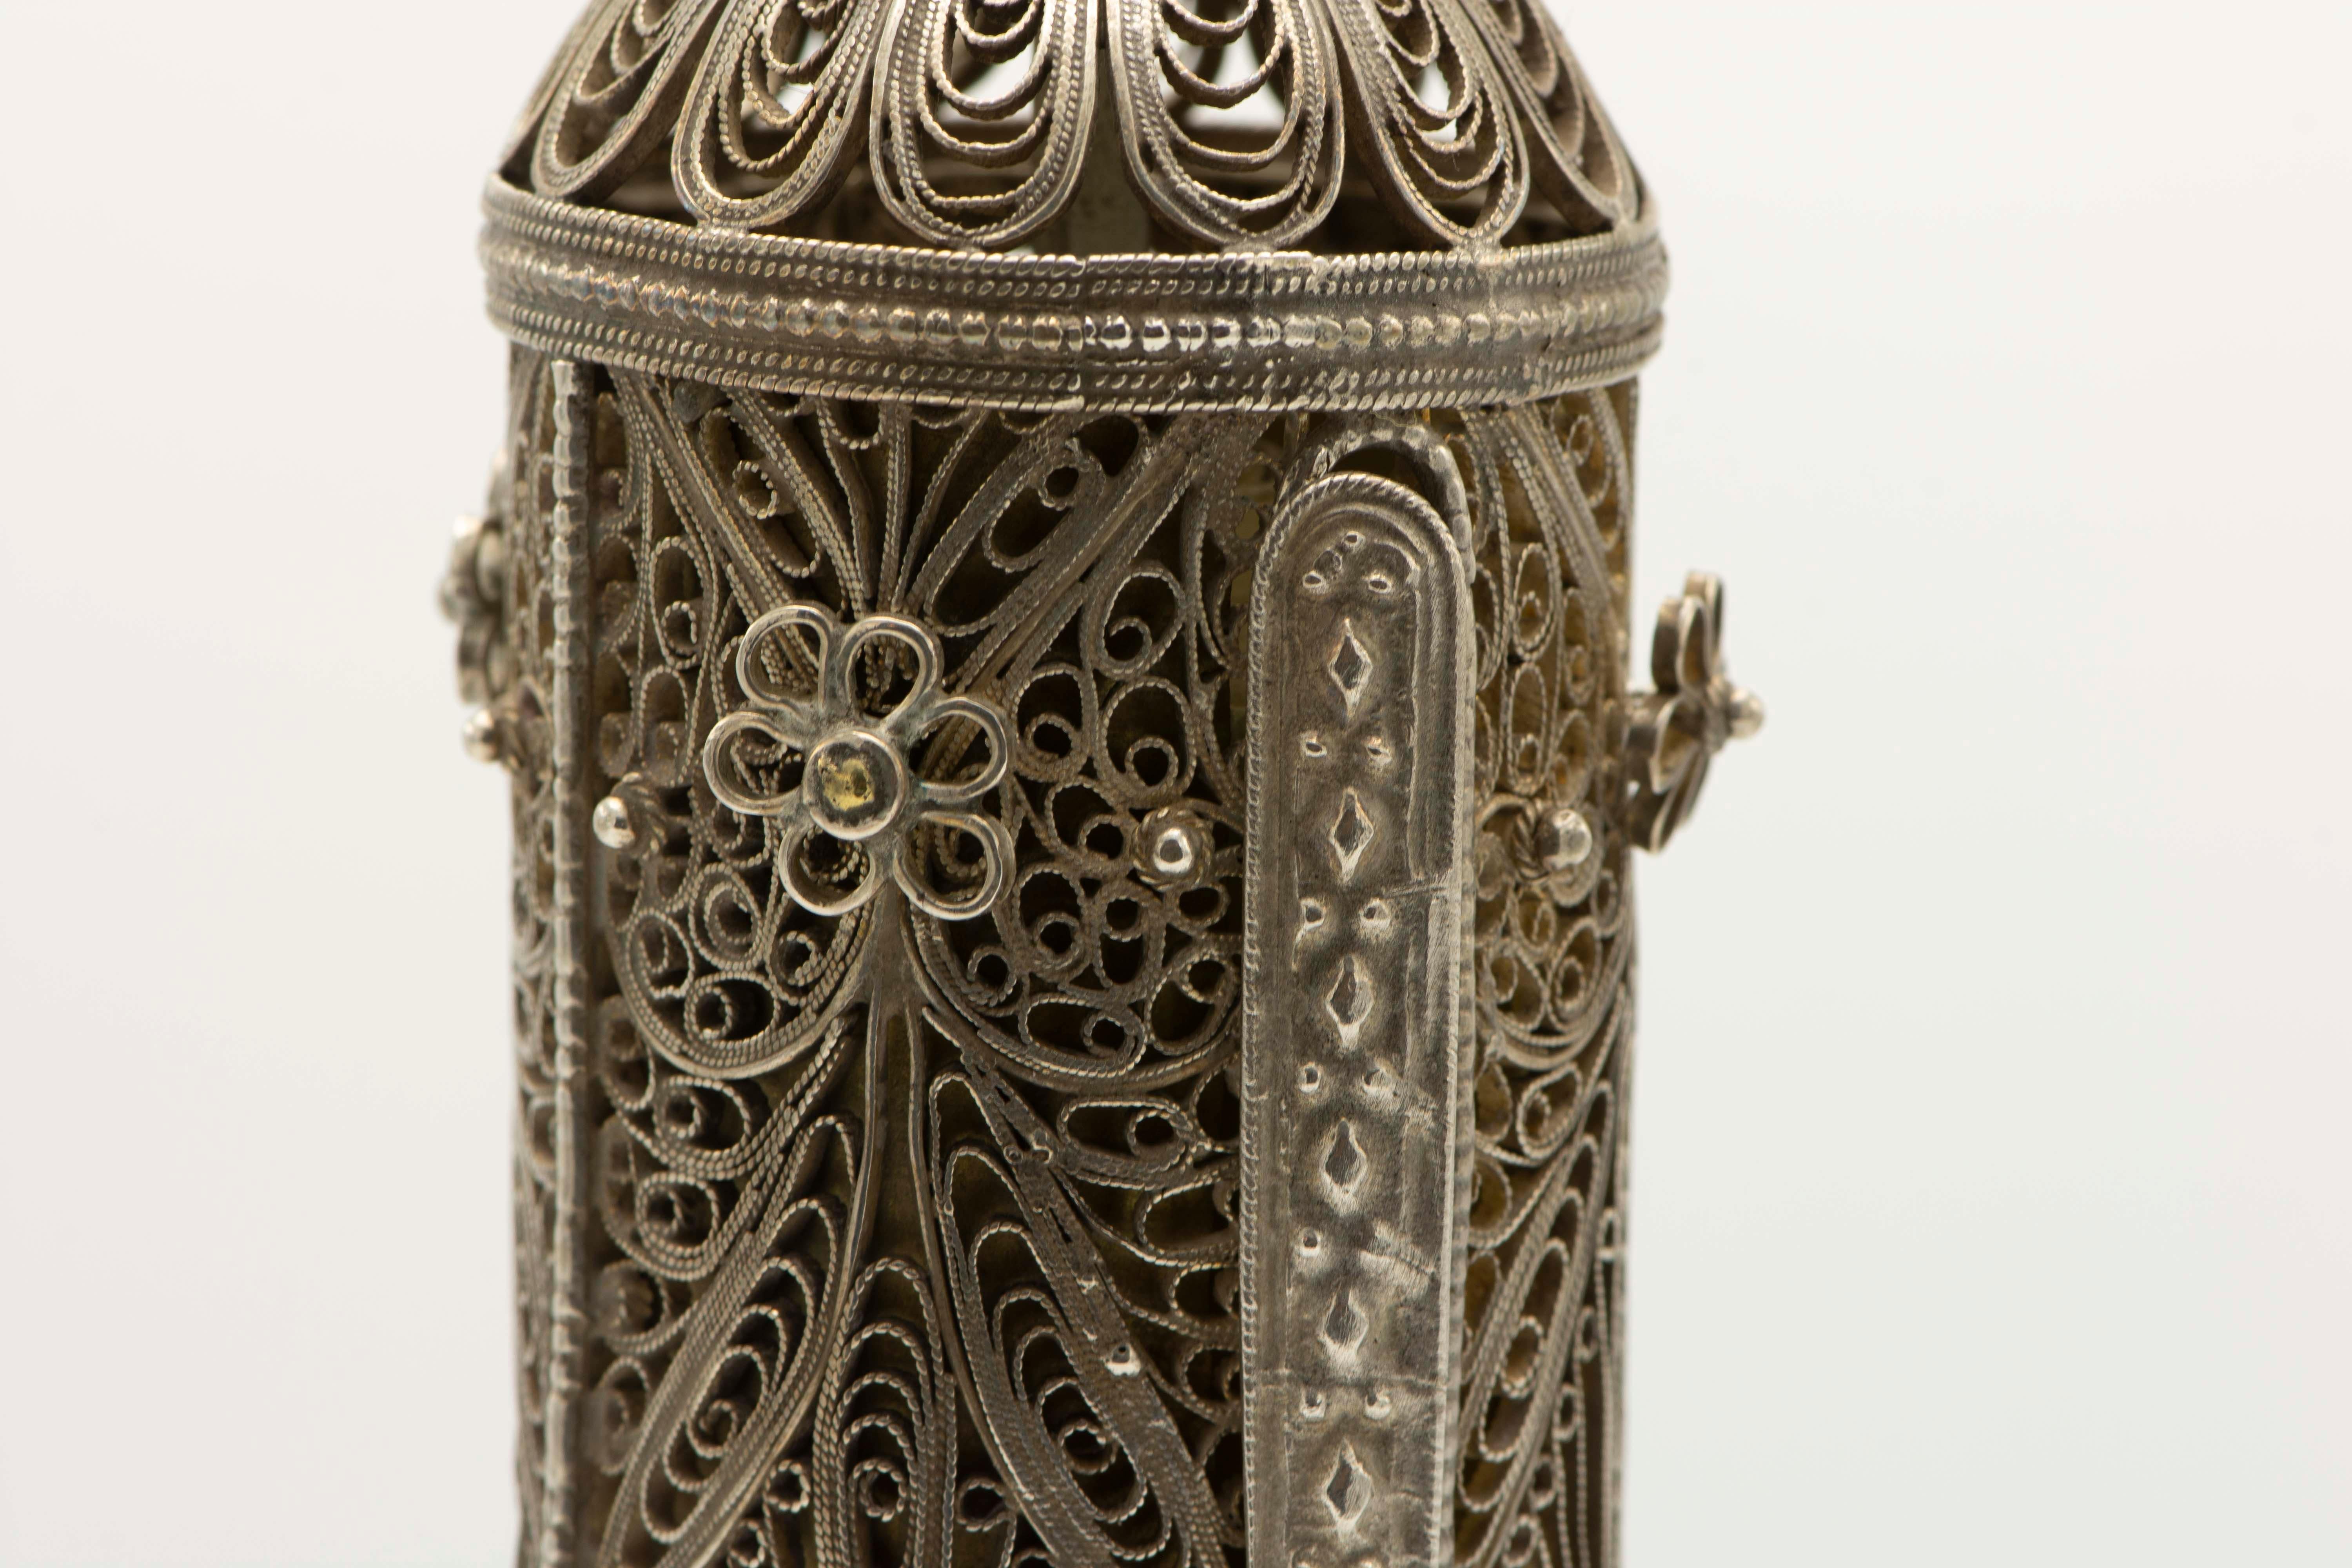 Hand-Crafted Late 19th Century Ottoman Empire Silver Megillah Case and Esther Scroll